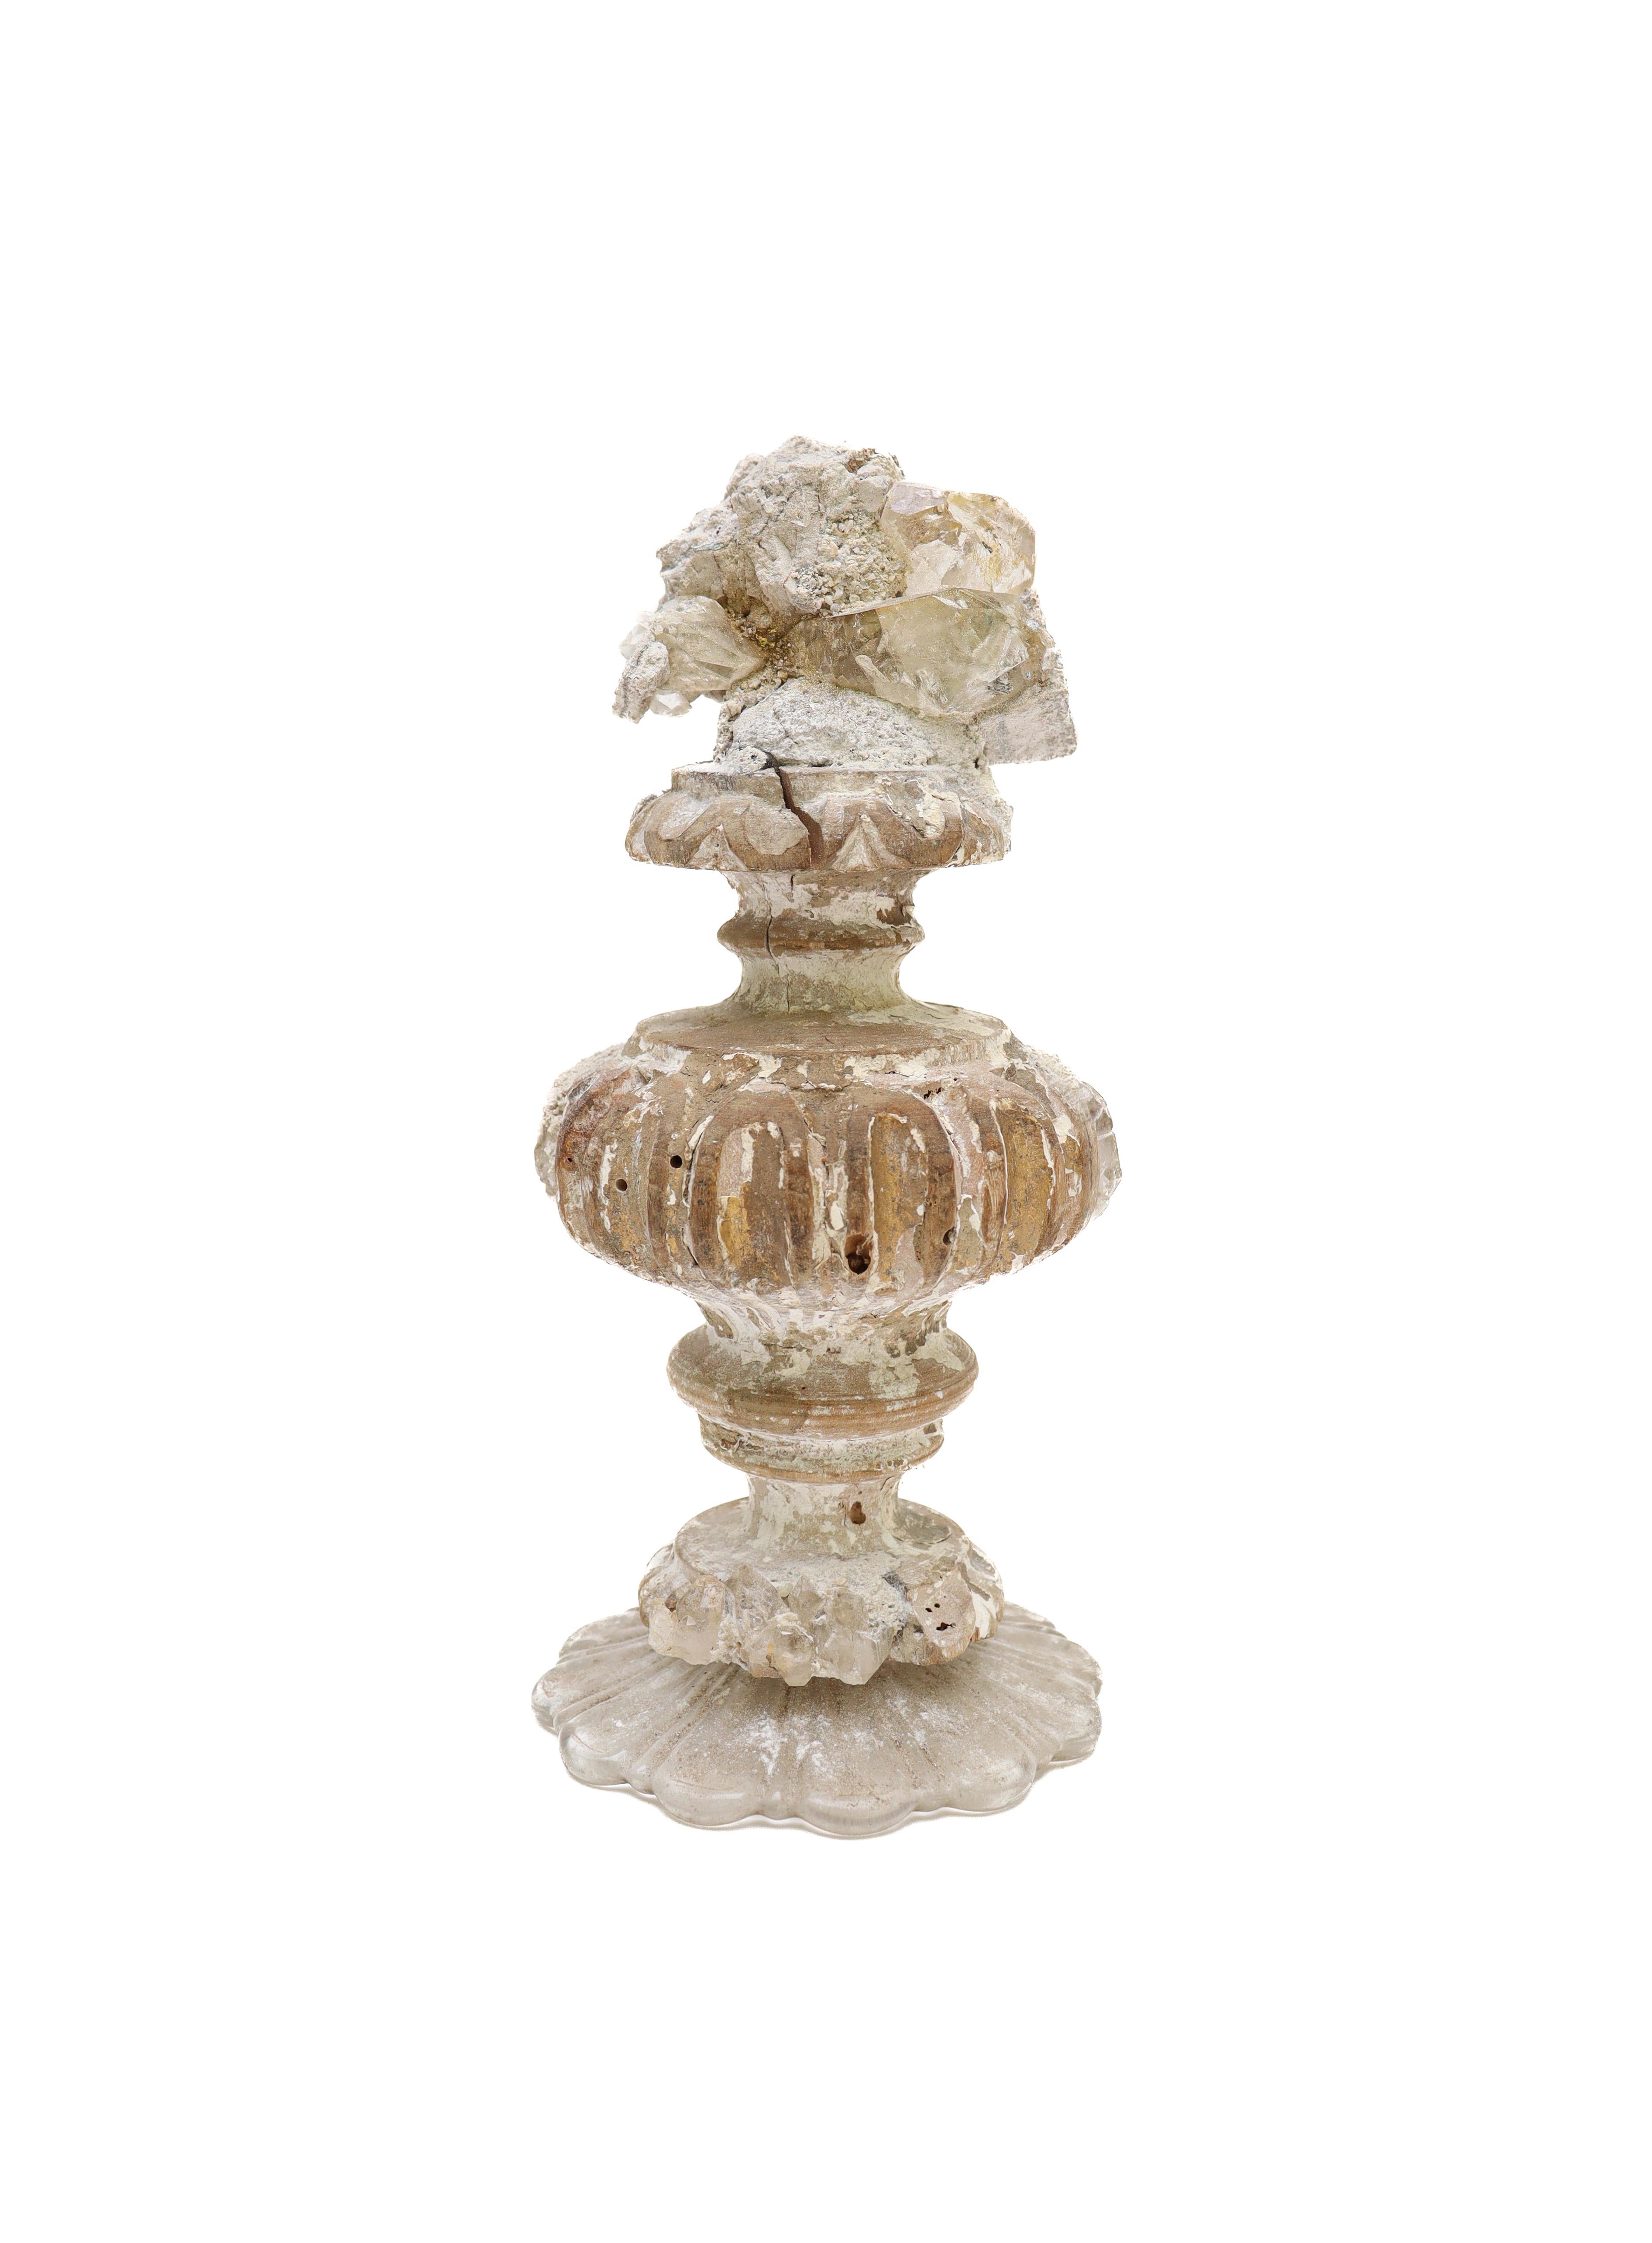 Rock Crystal 17th Century Italian Fragments 'Group of Three' with Calcite Crystals on Bobeche